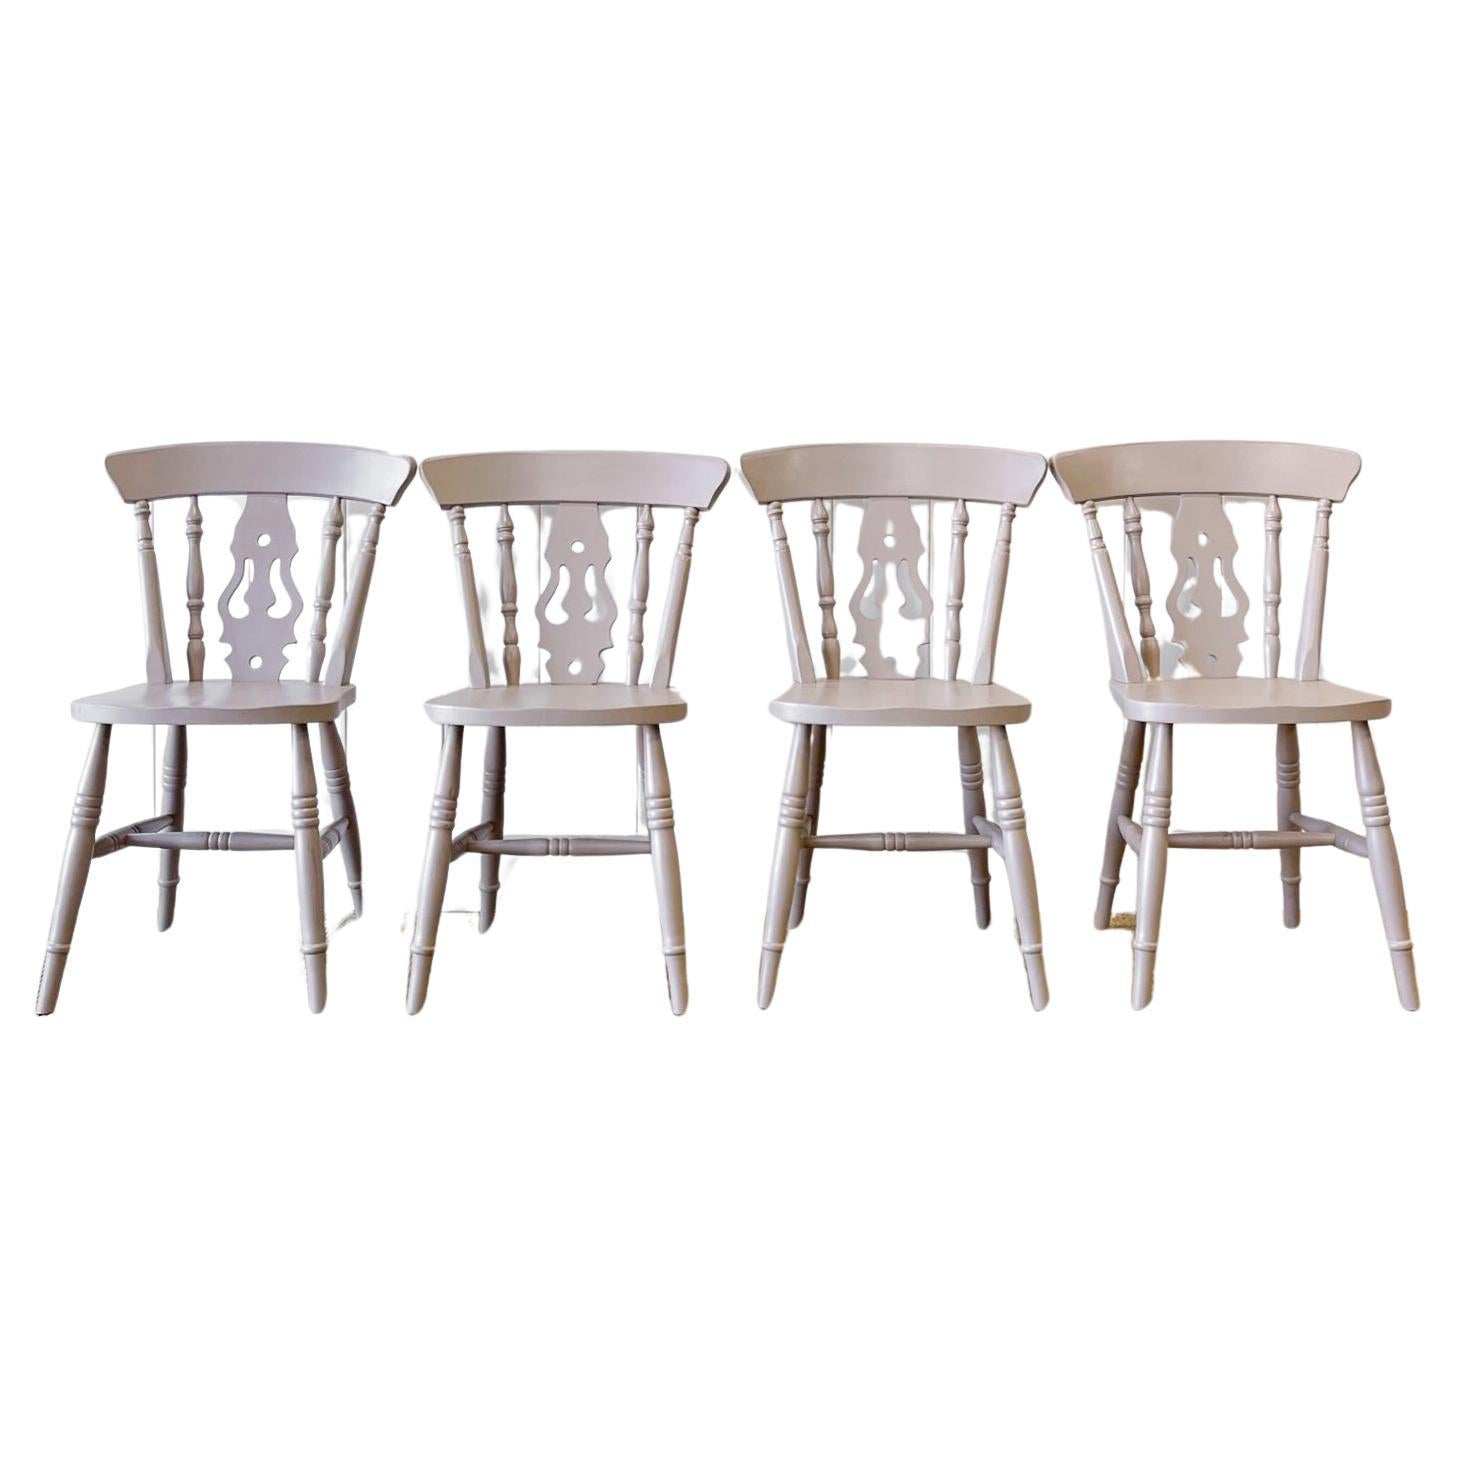 A Vintage Set of 4 Taupe Farmhouse Fiddleback Chairs For Sale